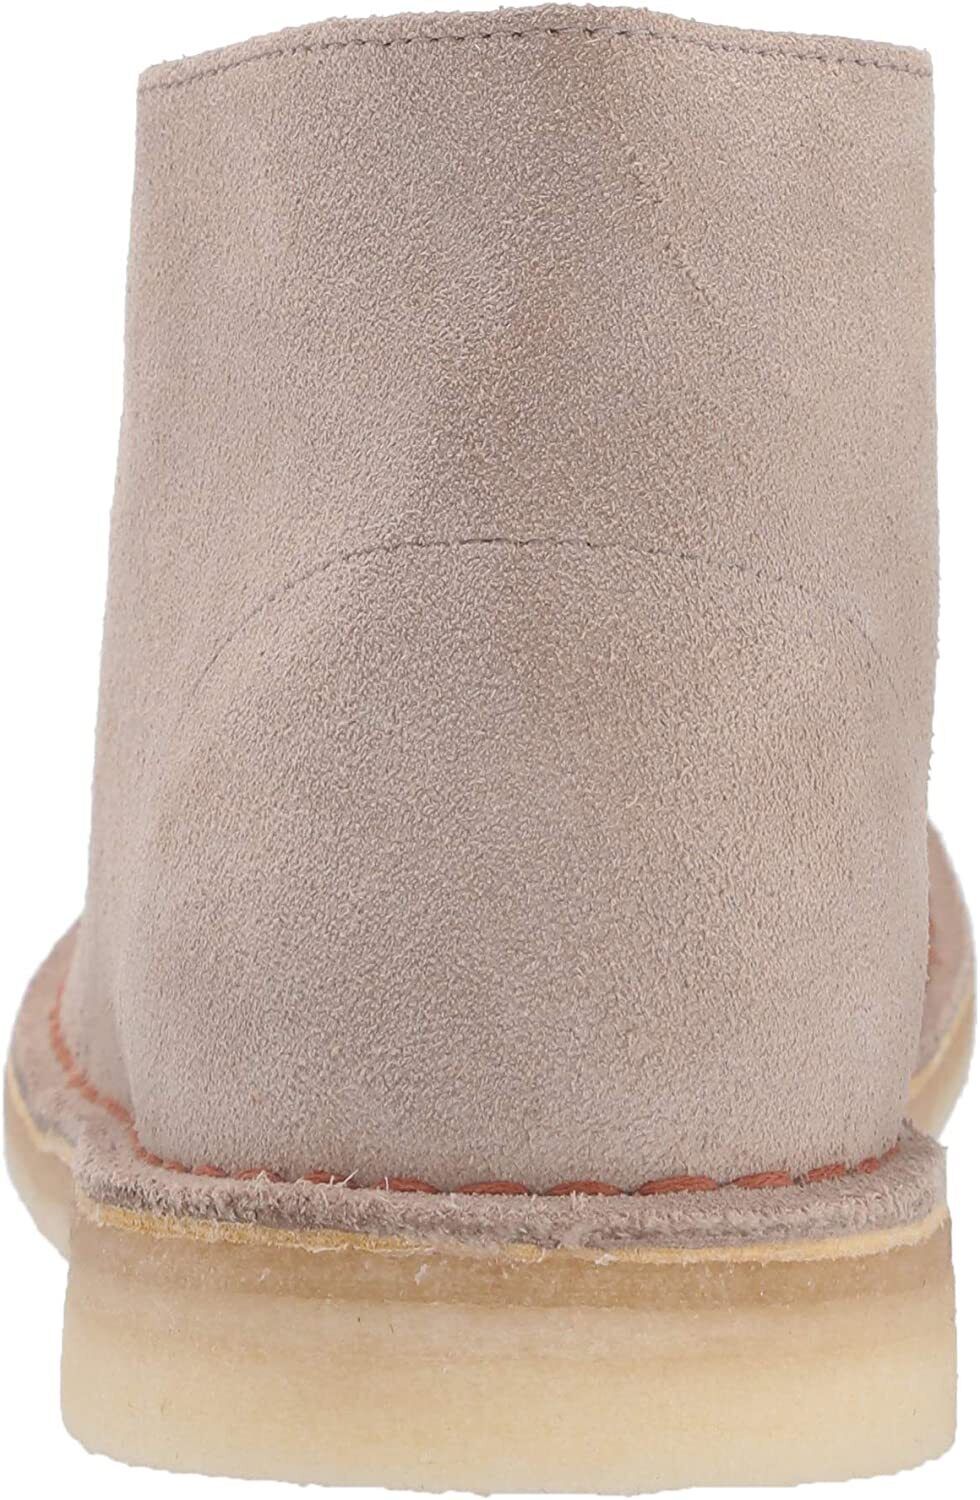  Stylish and comfortable Clarks Women's Desert Boot Sand Suede